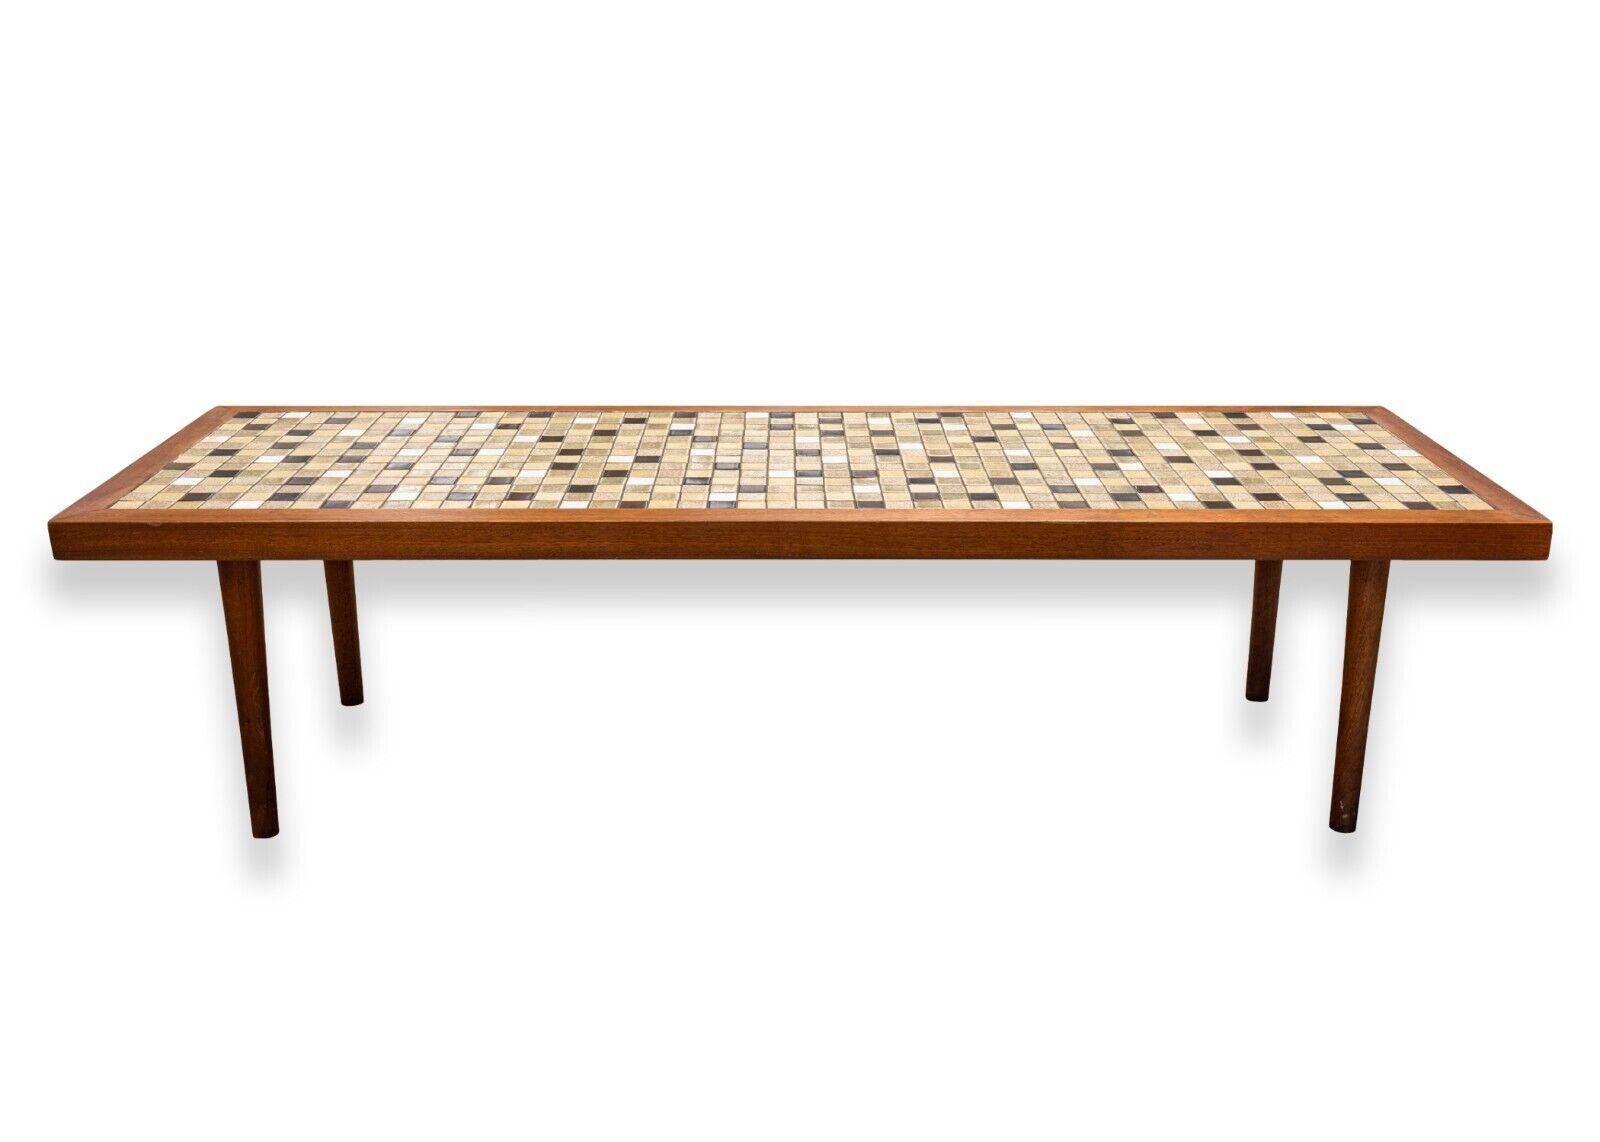 A mid century modern Marshal Studios Martz tile Wood rectangular coffee table. An understated and stunning coffee table designed by Gordon and Jane Martz for Marshall Studios. This beautiful piece features a walnut wood construction with a checkered